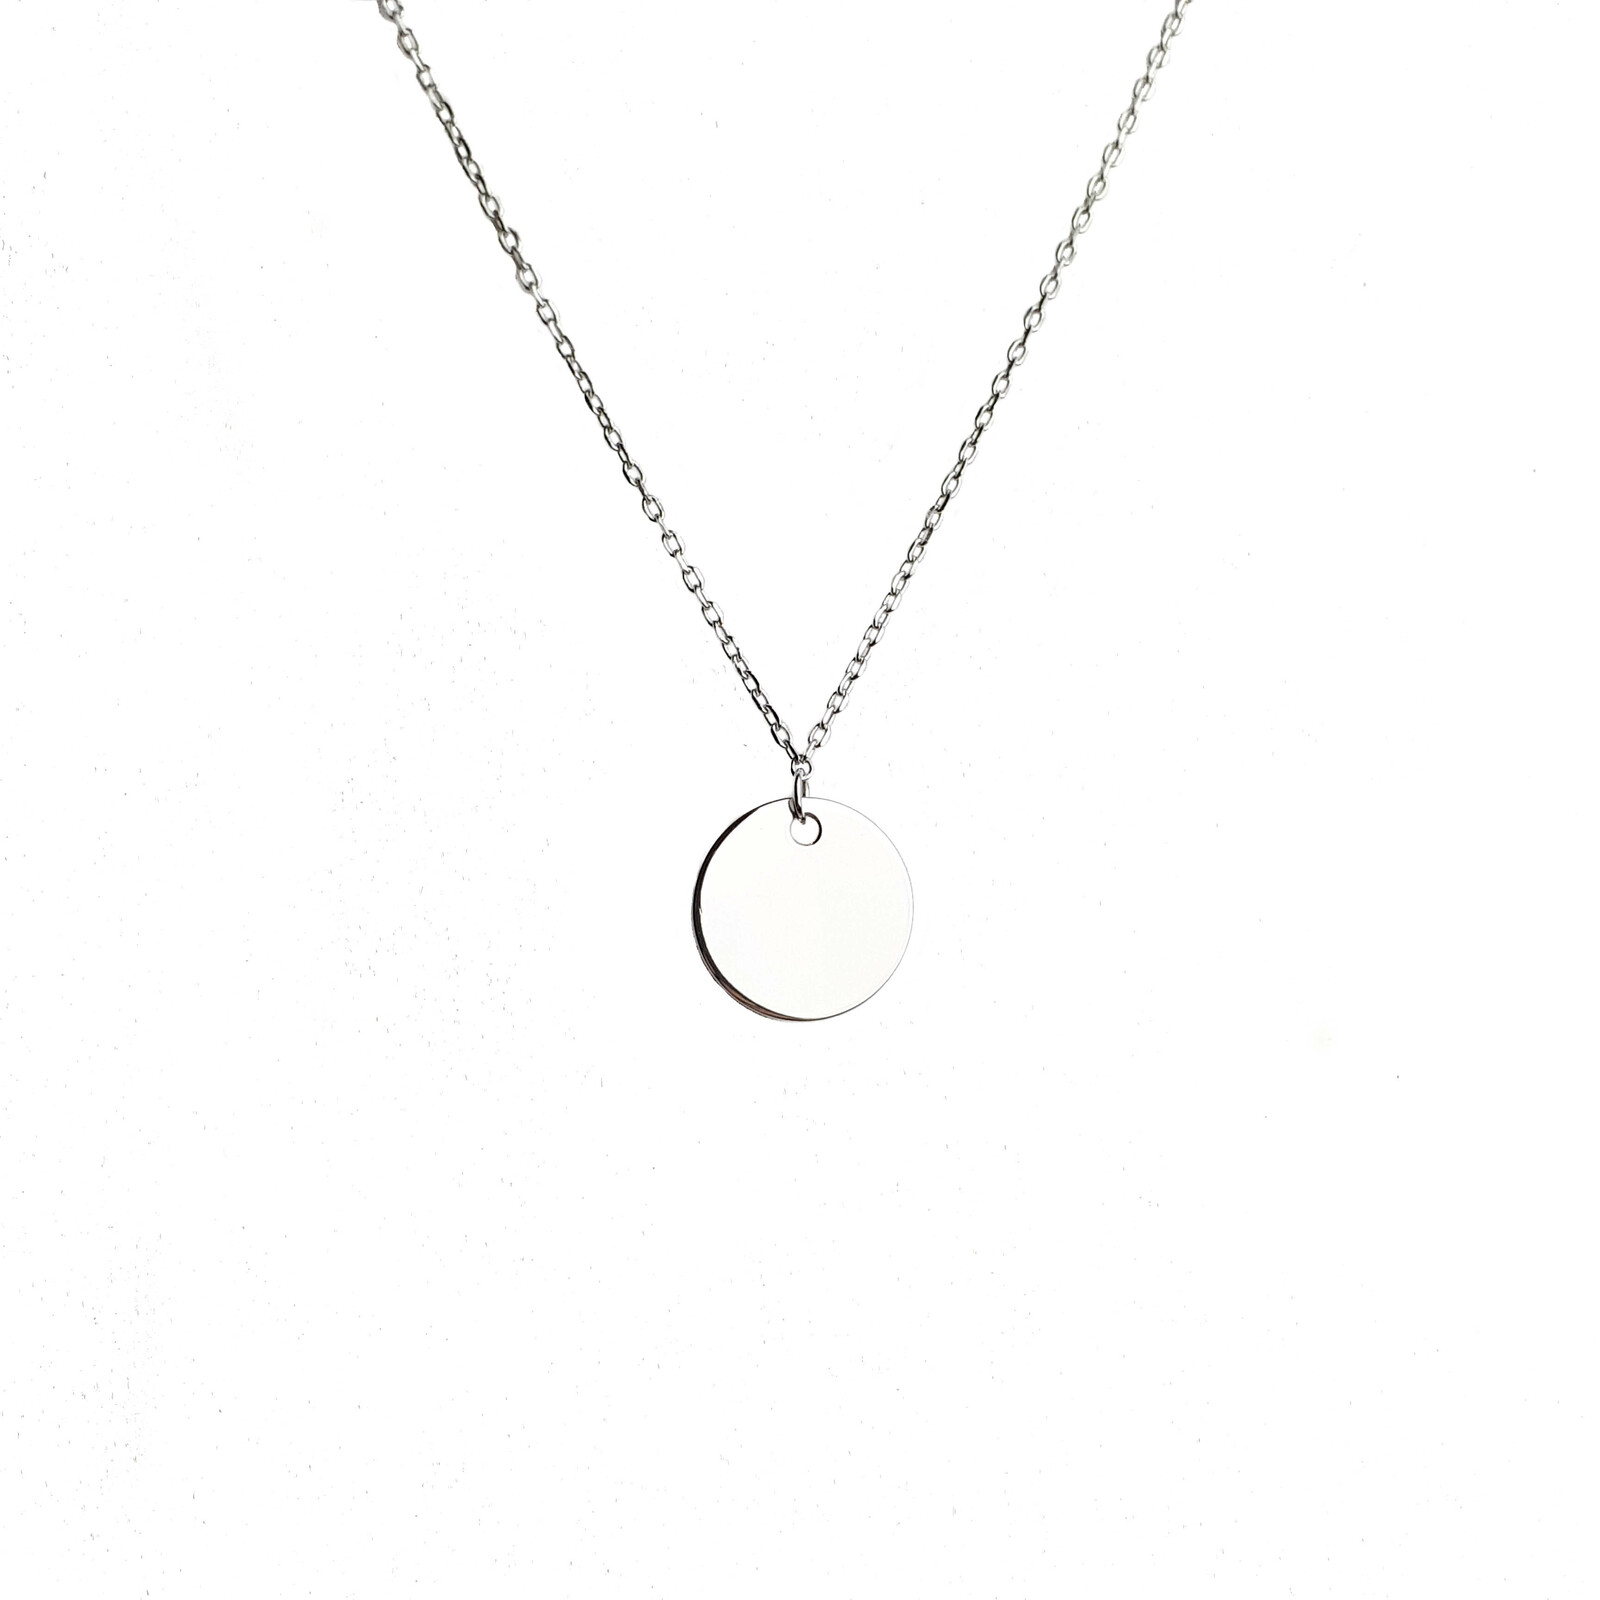 Hammered Sterling Silver Disc Necklace, Silver Circle Pendant, Handmade Silver  Disc Necklace on Chain, Hammered Silver Pendant - Etsy